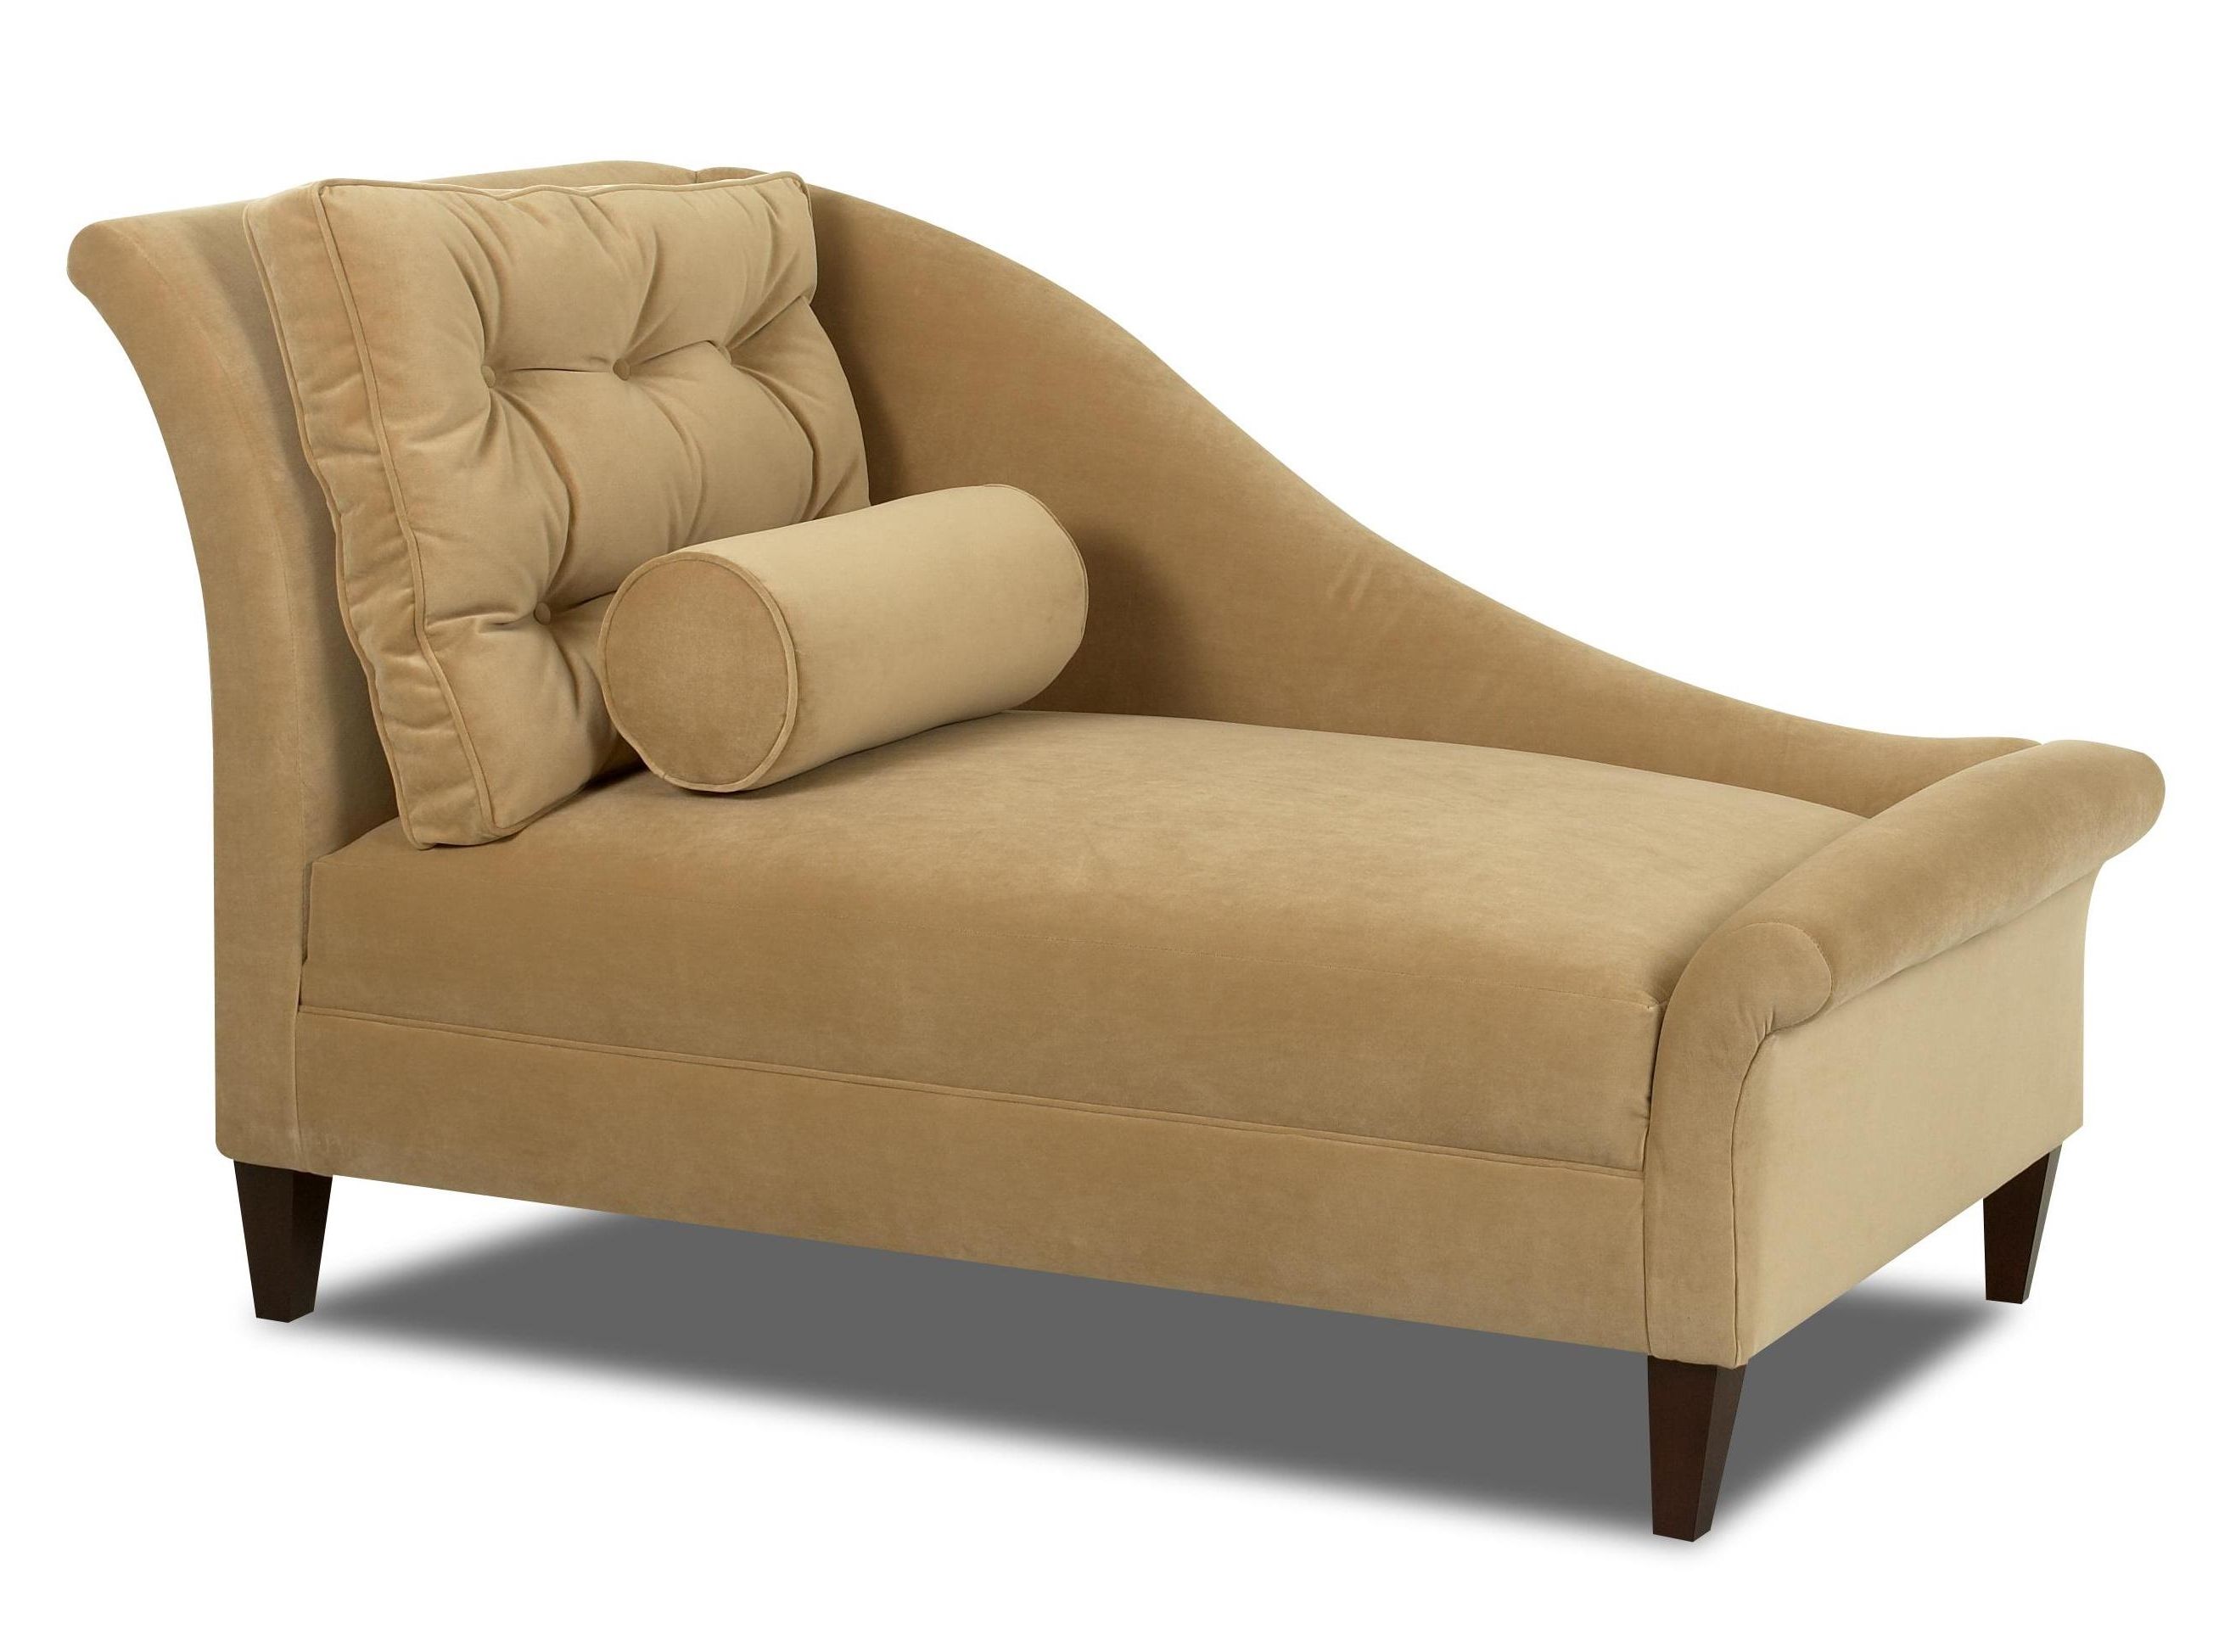 Convertible Chair : Lounge Bedroom Chaise Longue Curved Chaise In Most Popular Narrow Chaise Lounge Chairs (View 15 of 15)